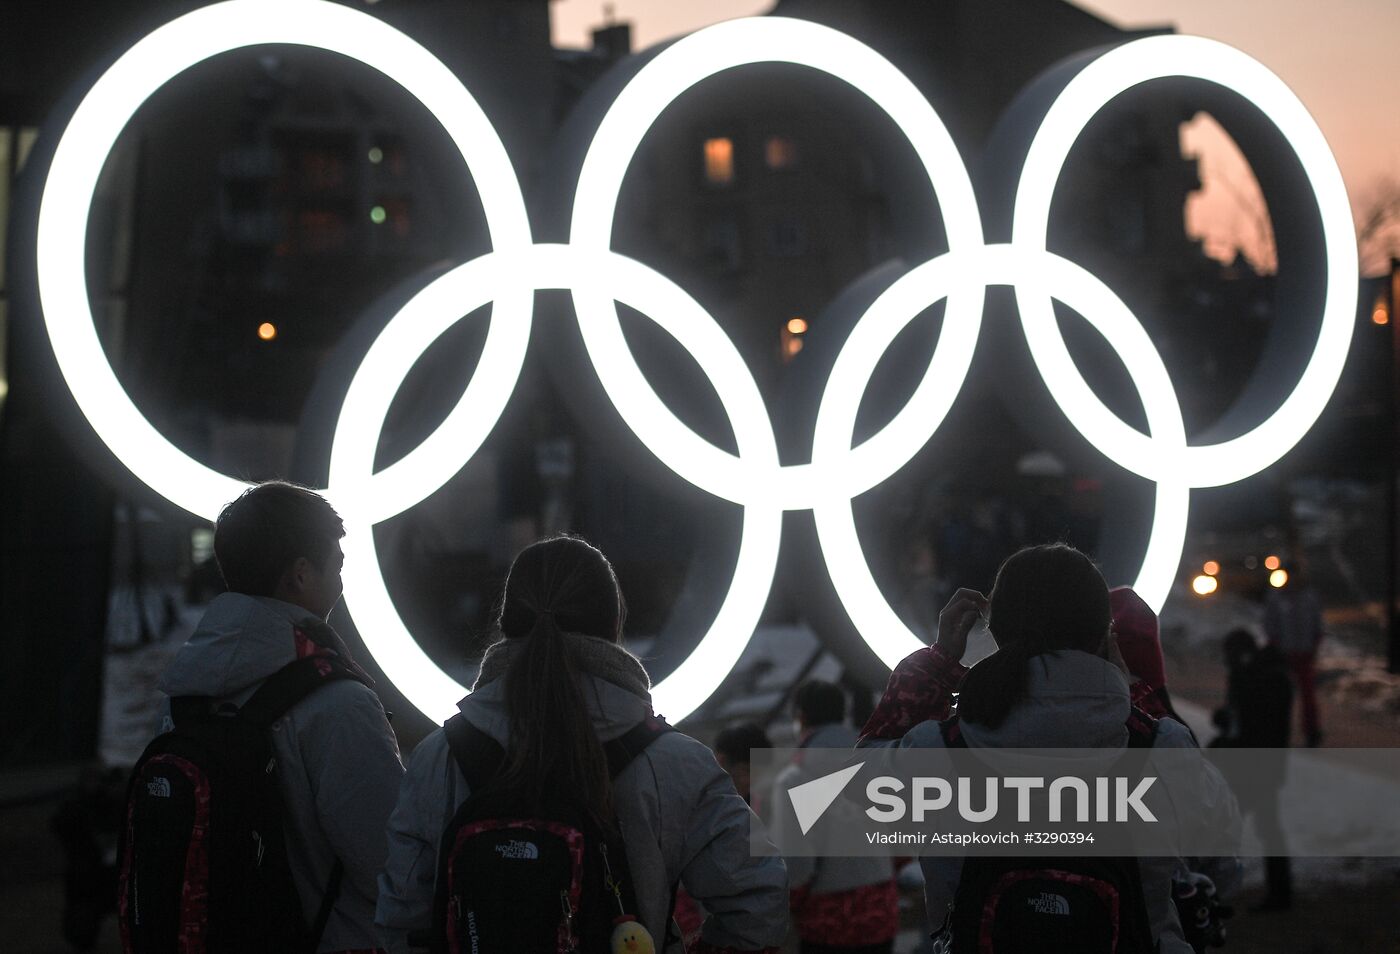 Preparations for 2018 Winter Olympics in Pyeongchang